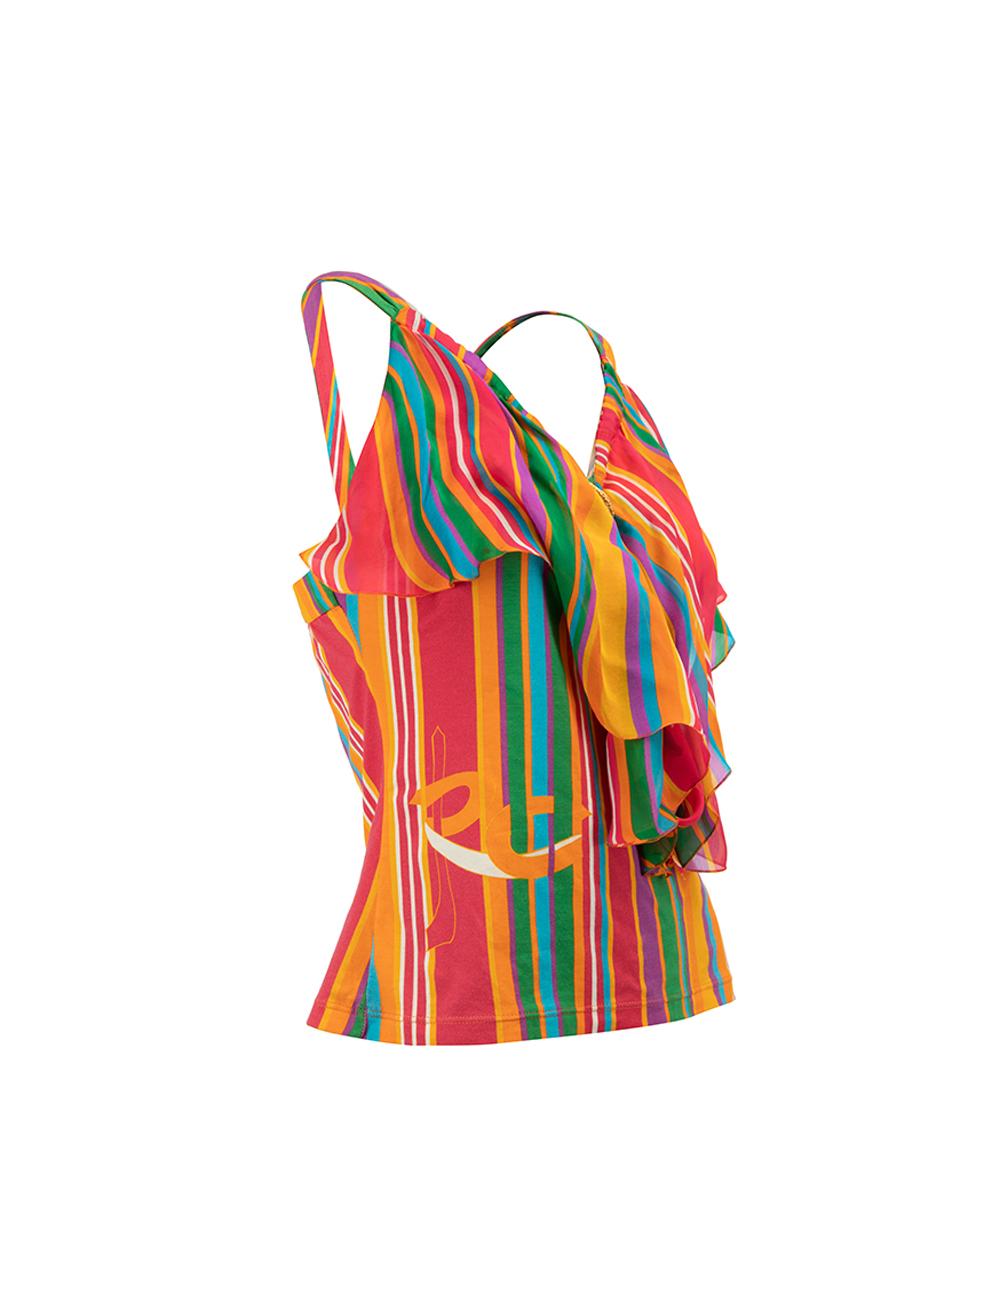 CONDITION is Very good. Minimal wear to top is evident. Minimal wear to the chiffon where some faint marks are on this used Roberto Cavalli designer resale item. 

Details
Multicolour
Cotton
Cropped top
Striped pattern
Cross straps with plunge